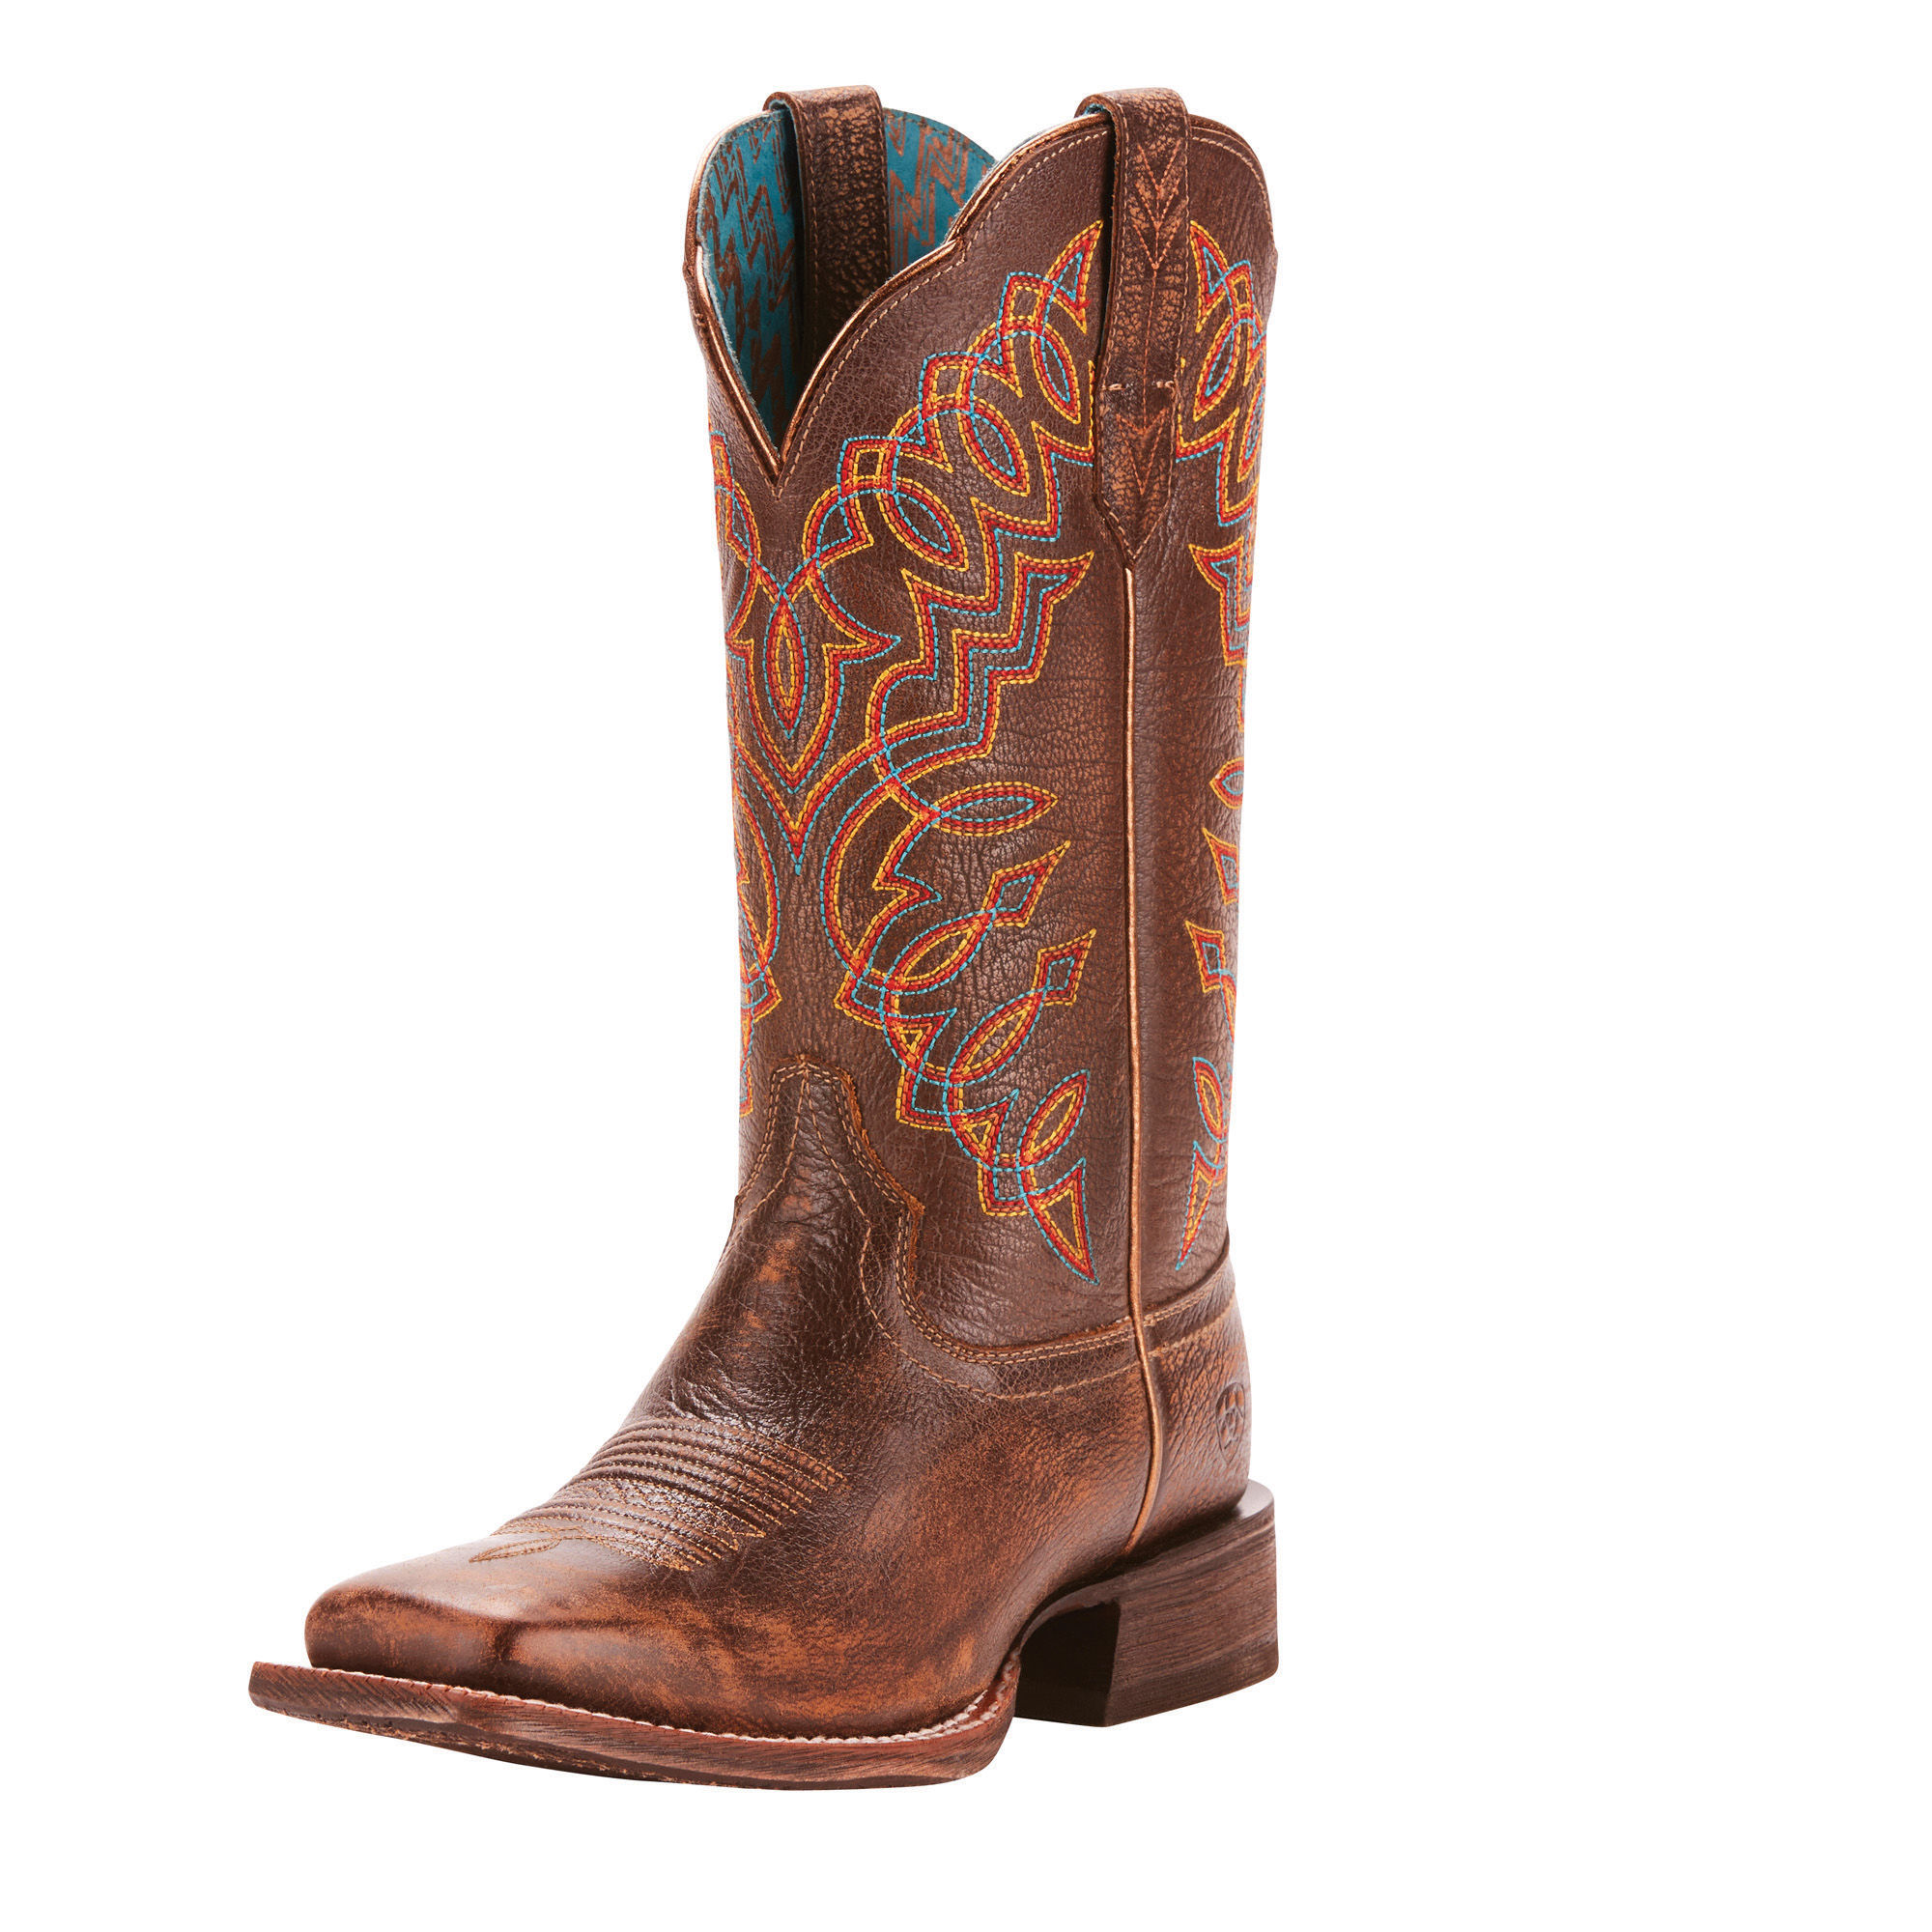 Look different and feel
comfortable with womens western boots